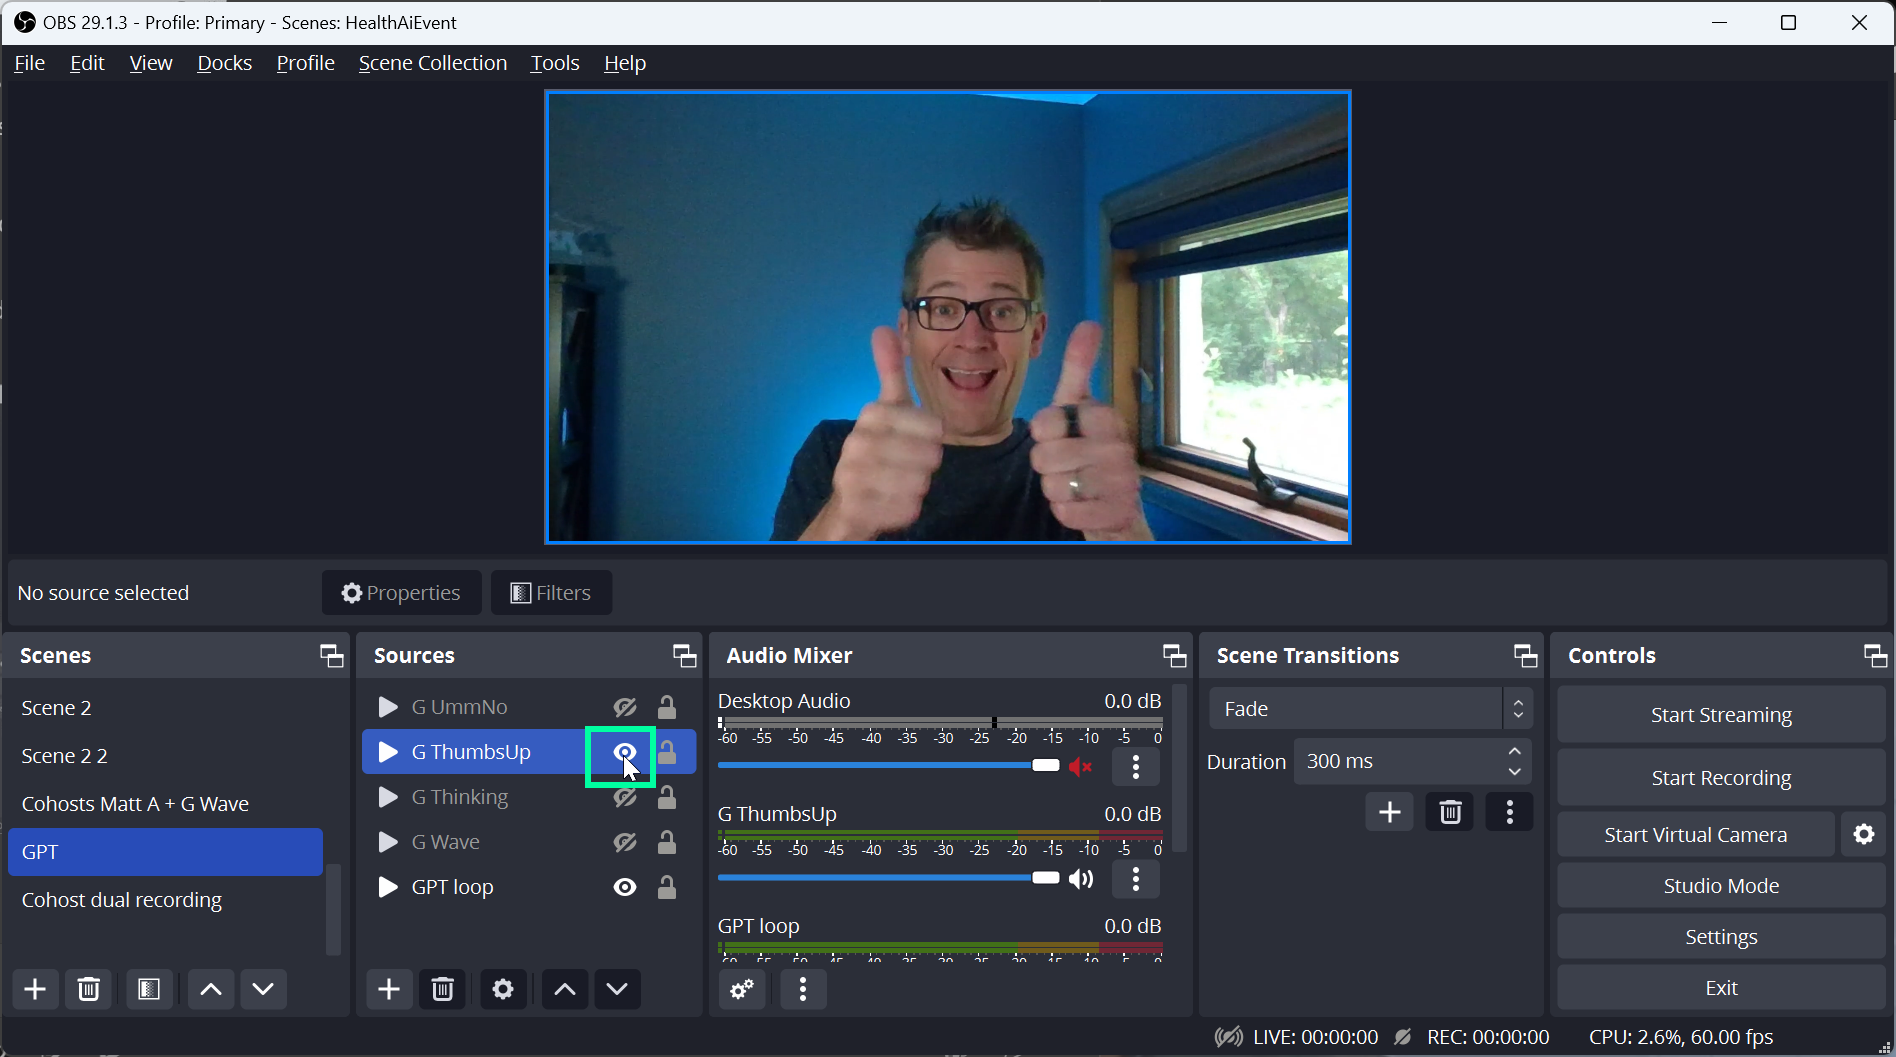 A screenshot of OBS with a box around the "thumbs up" layer, which resulted in the preview pane showing a video with my thumbs up